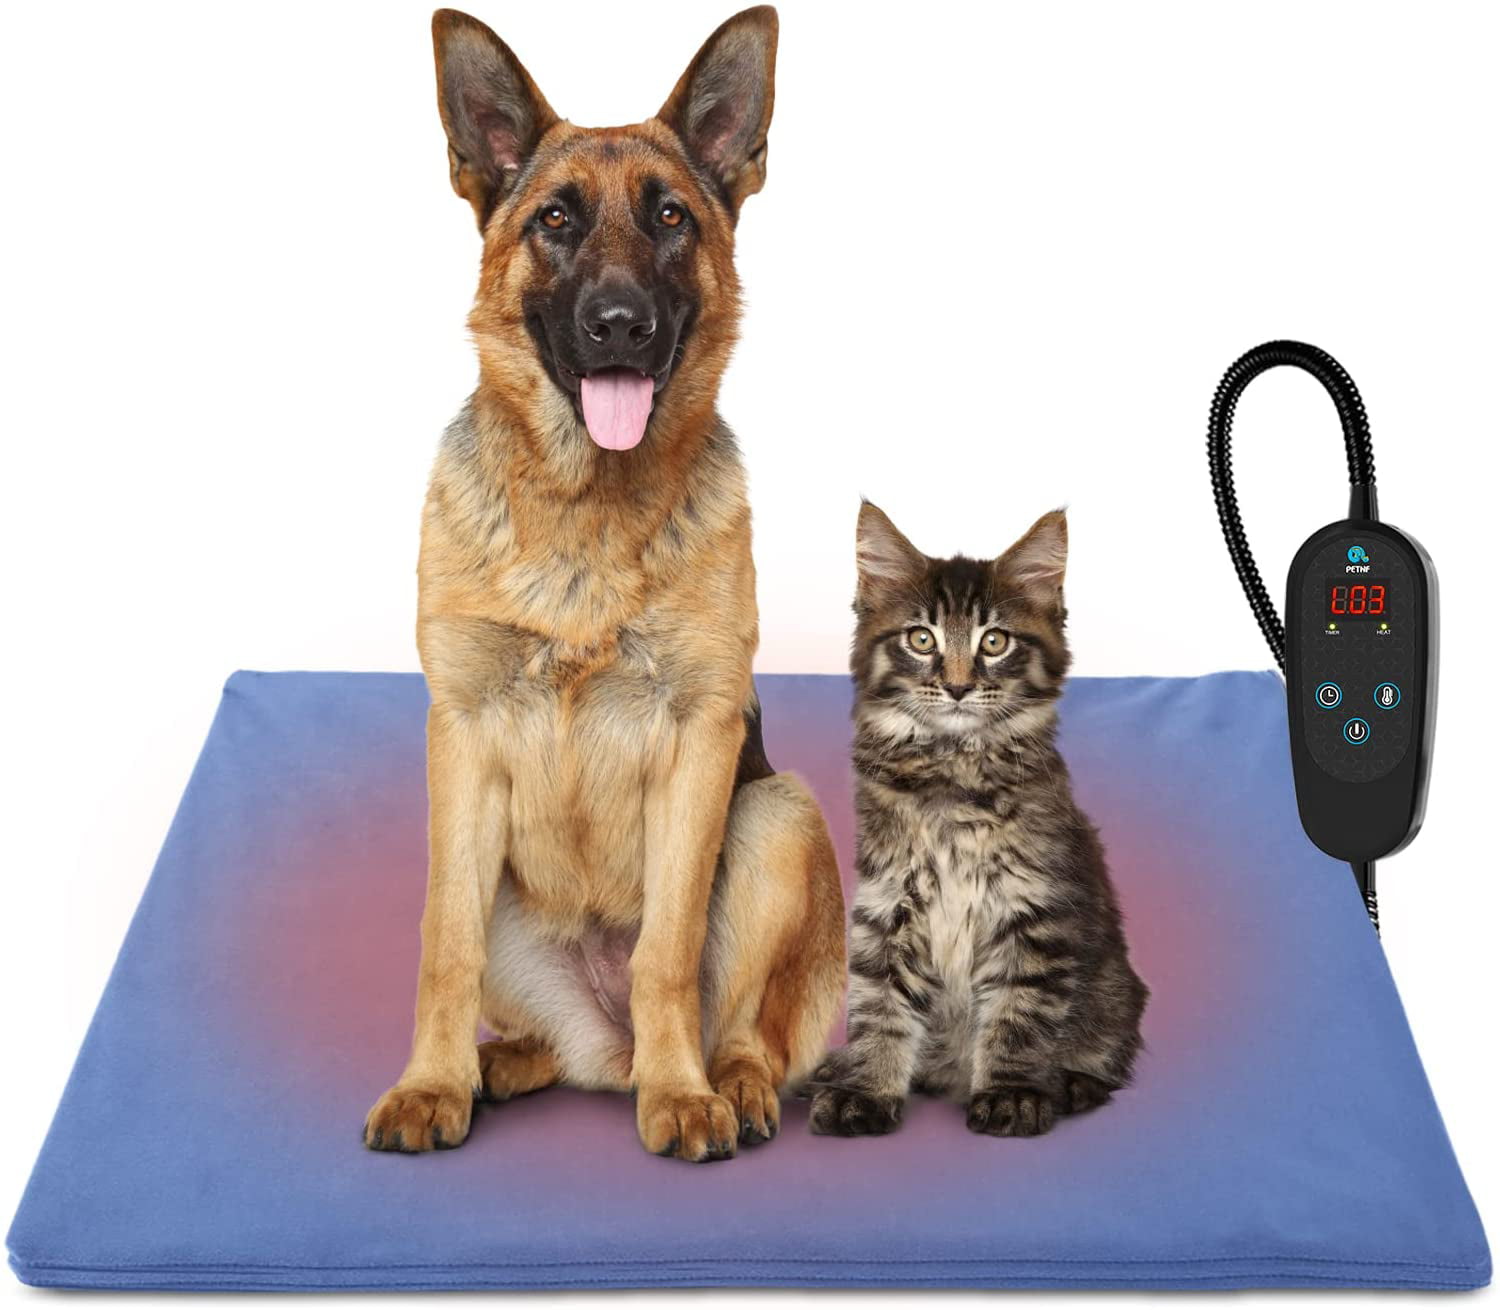 Dog Heat Pad Pet Cat Puppy Small Heated Electric Vinyl Bed Use in Whelping Box 